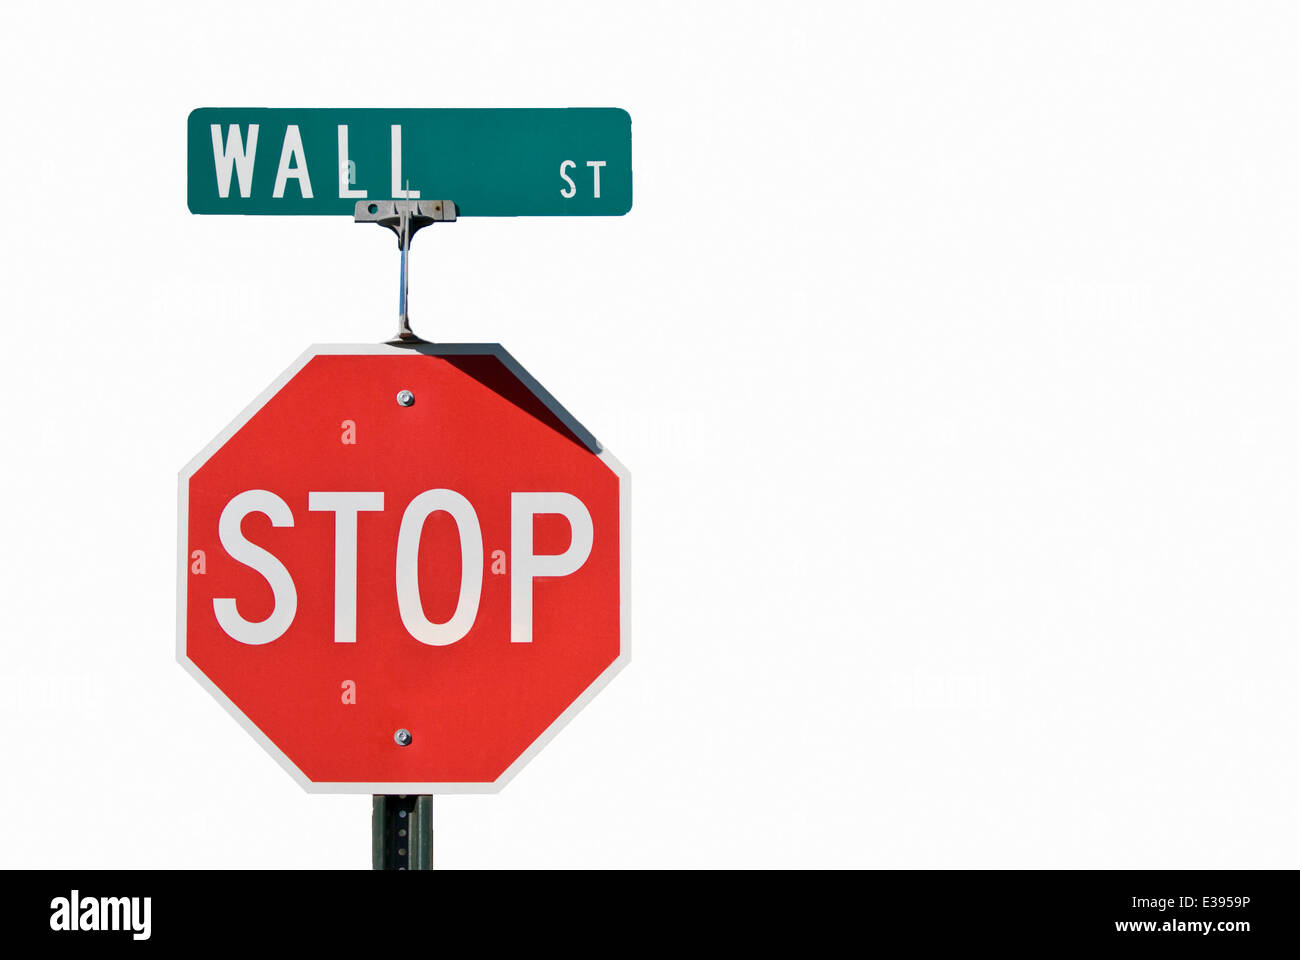 Wall street and stop signs on same post Stock Photo